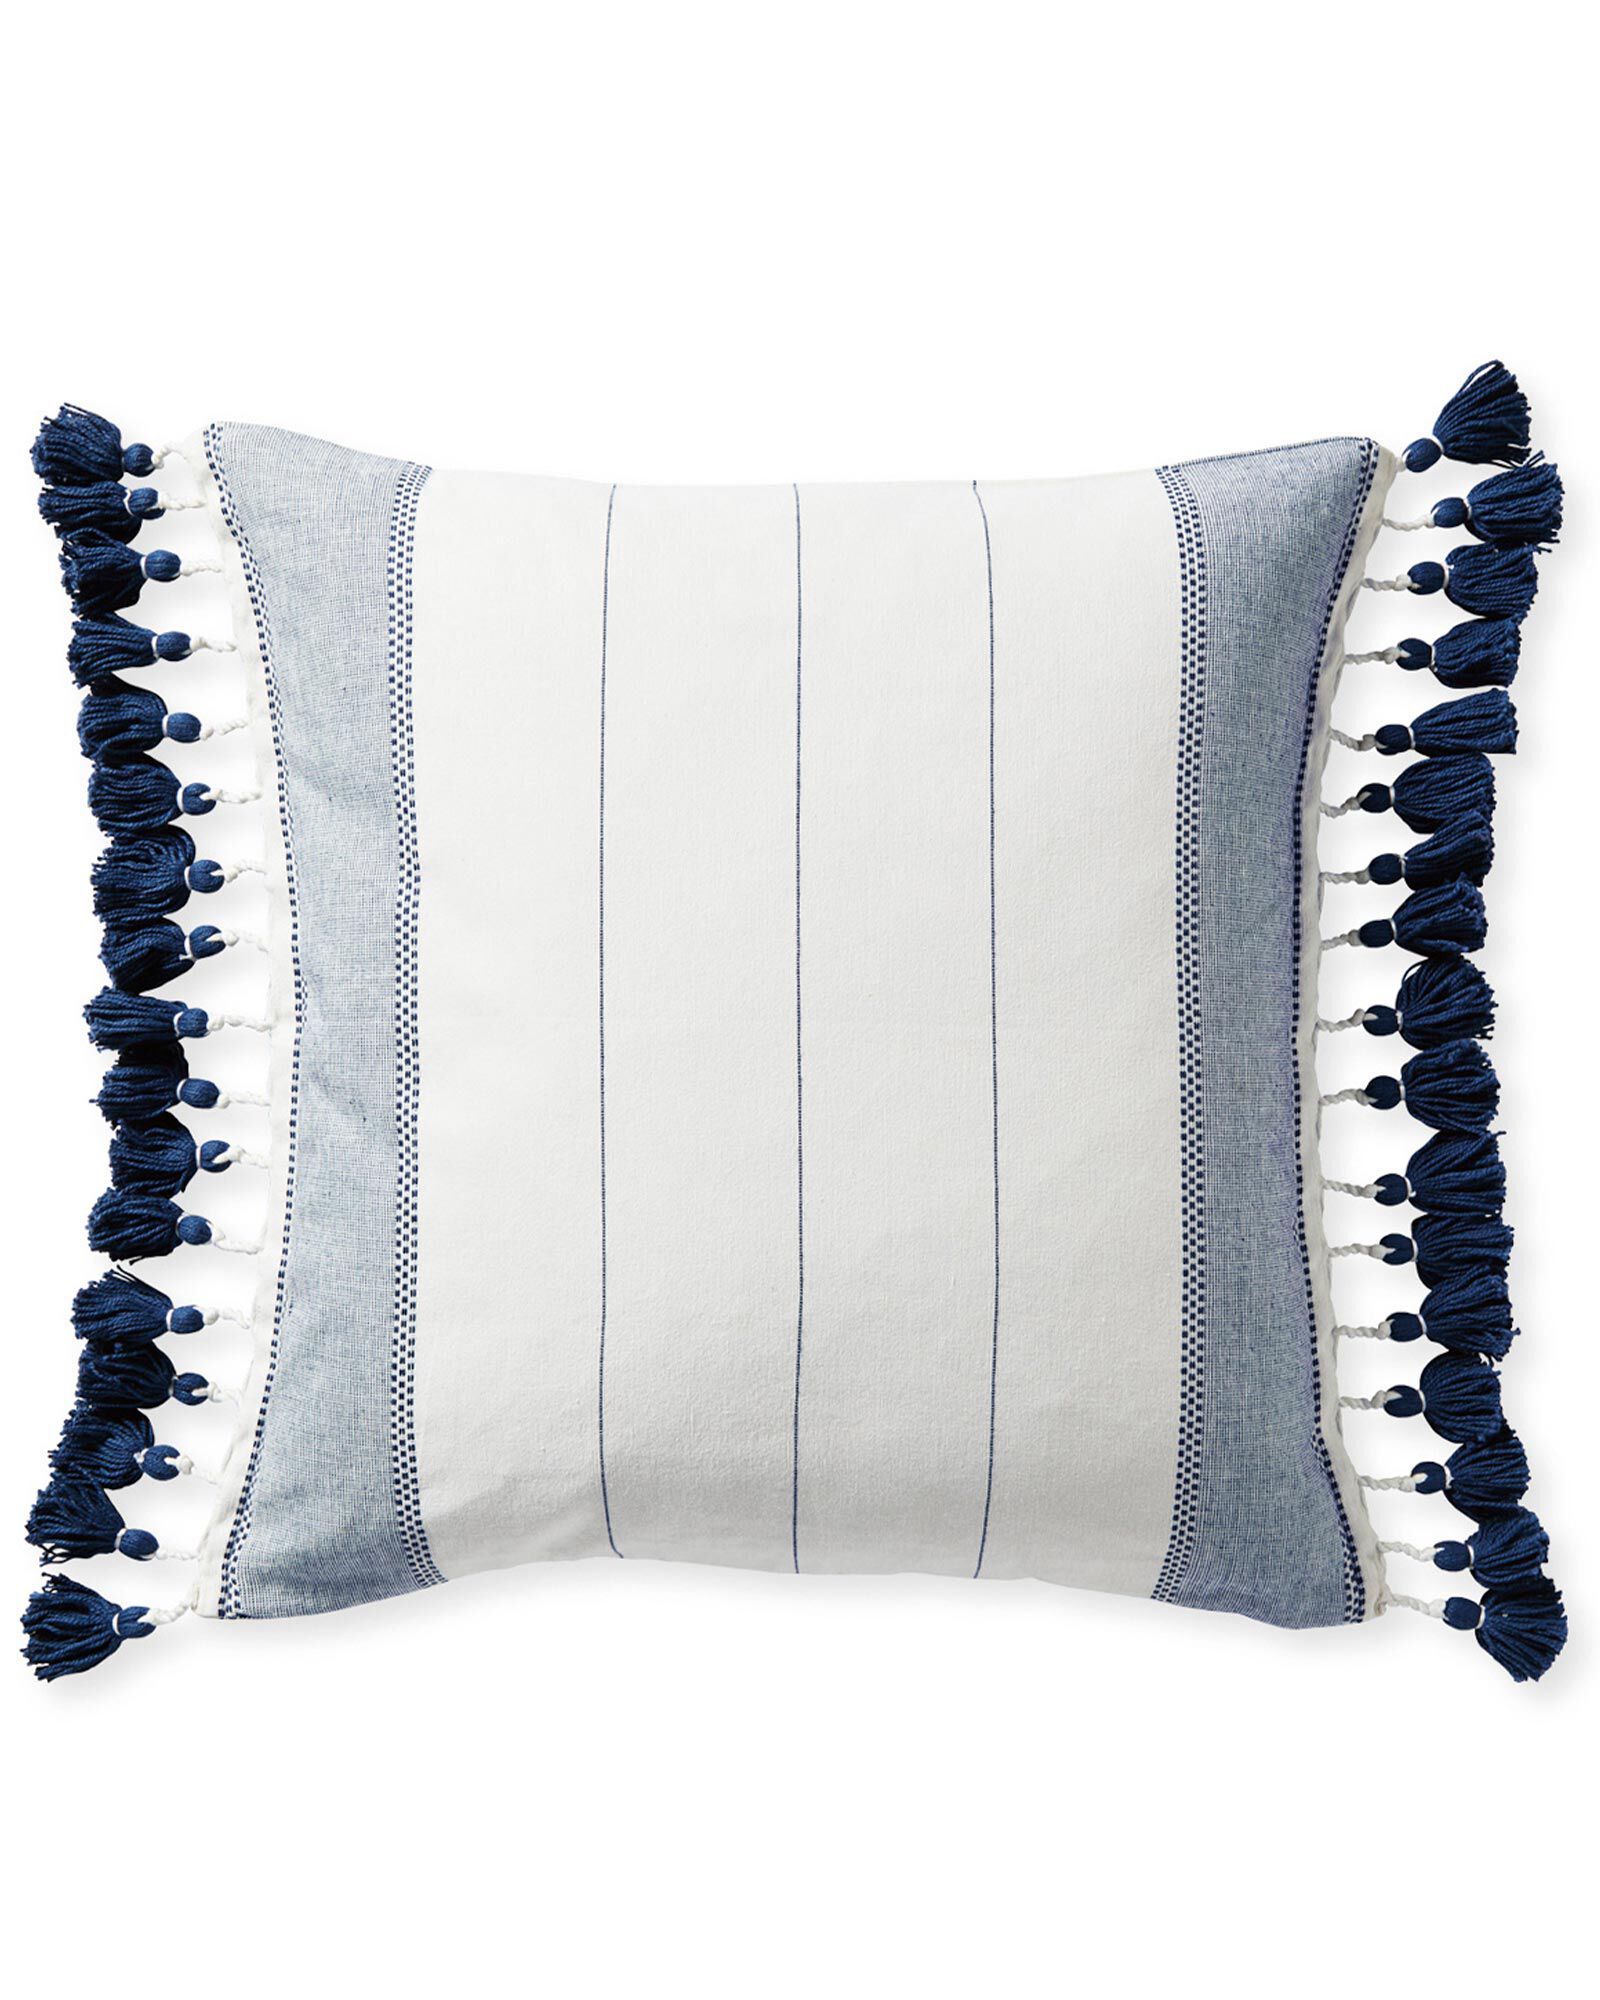 Monterey Pillow Cover | Serena and Lily